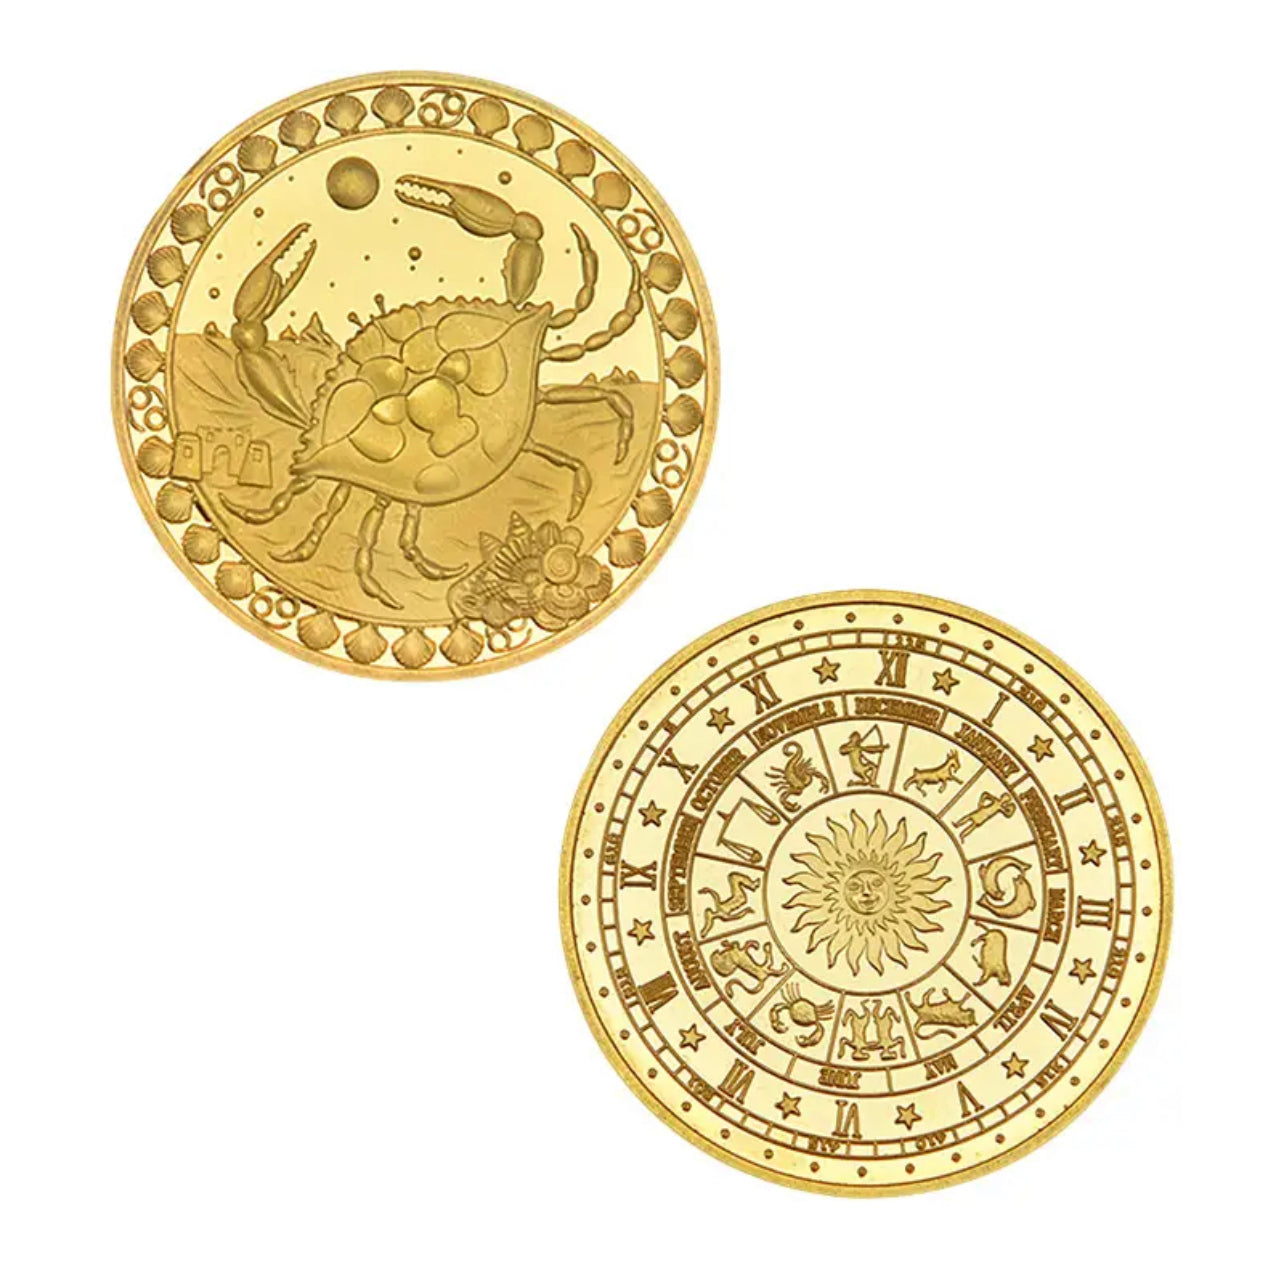 Gold Zodiac Coin - Stainless Steel - Horoscope, Astrology theme